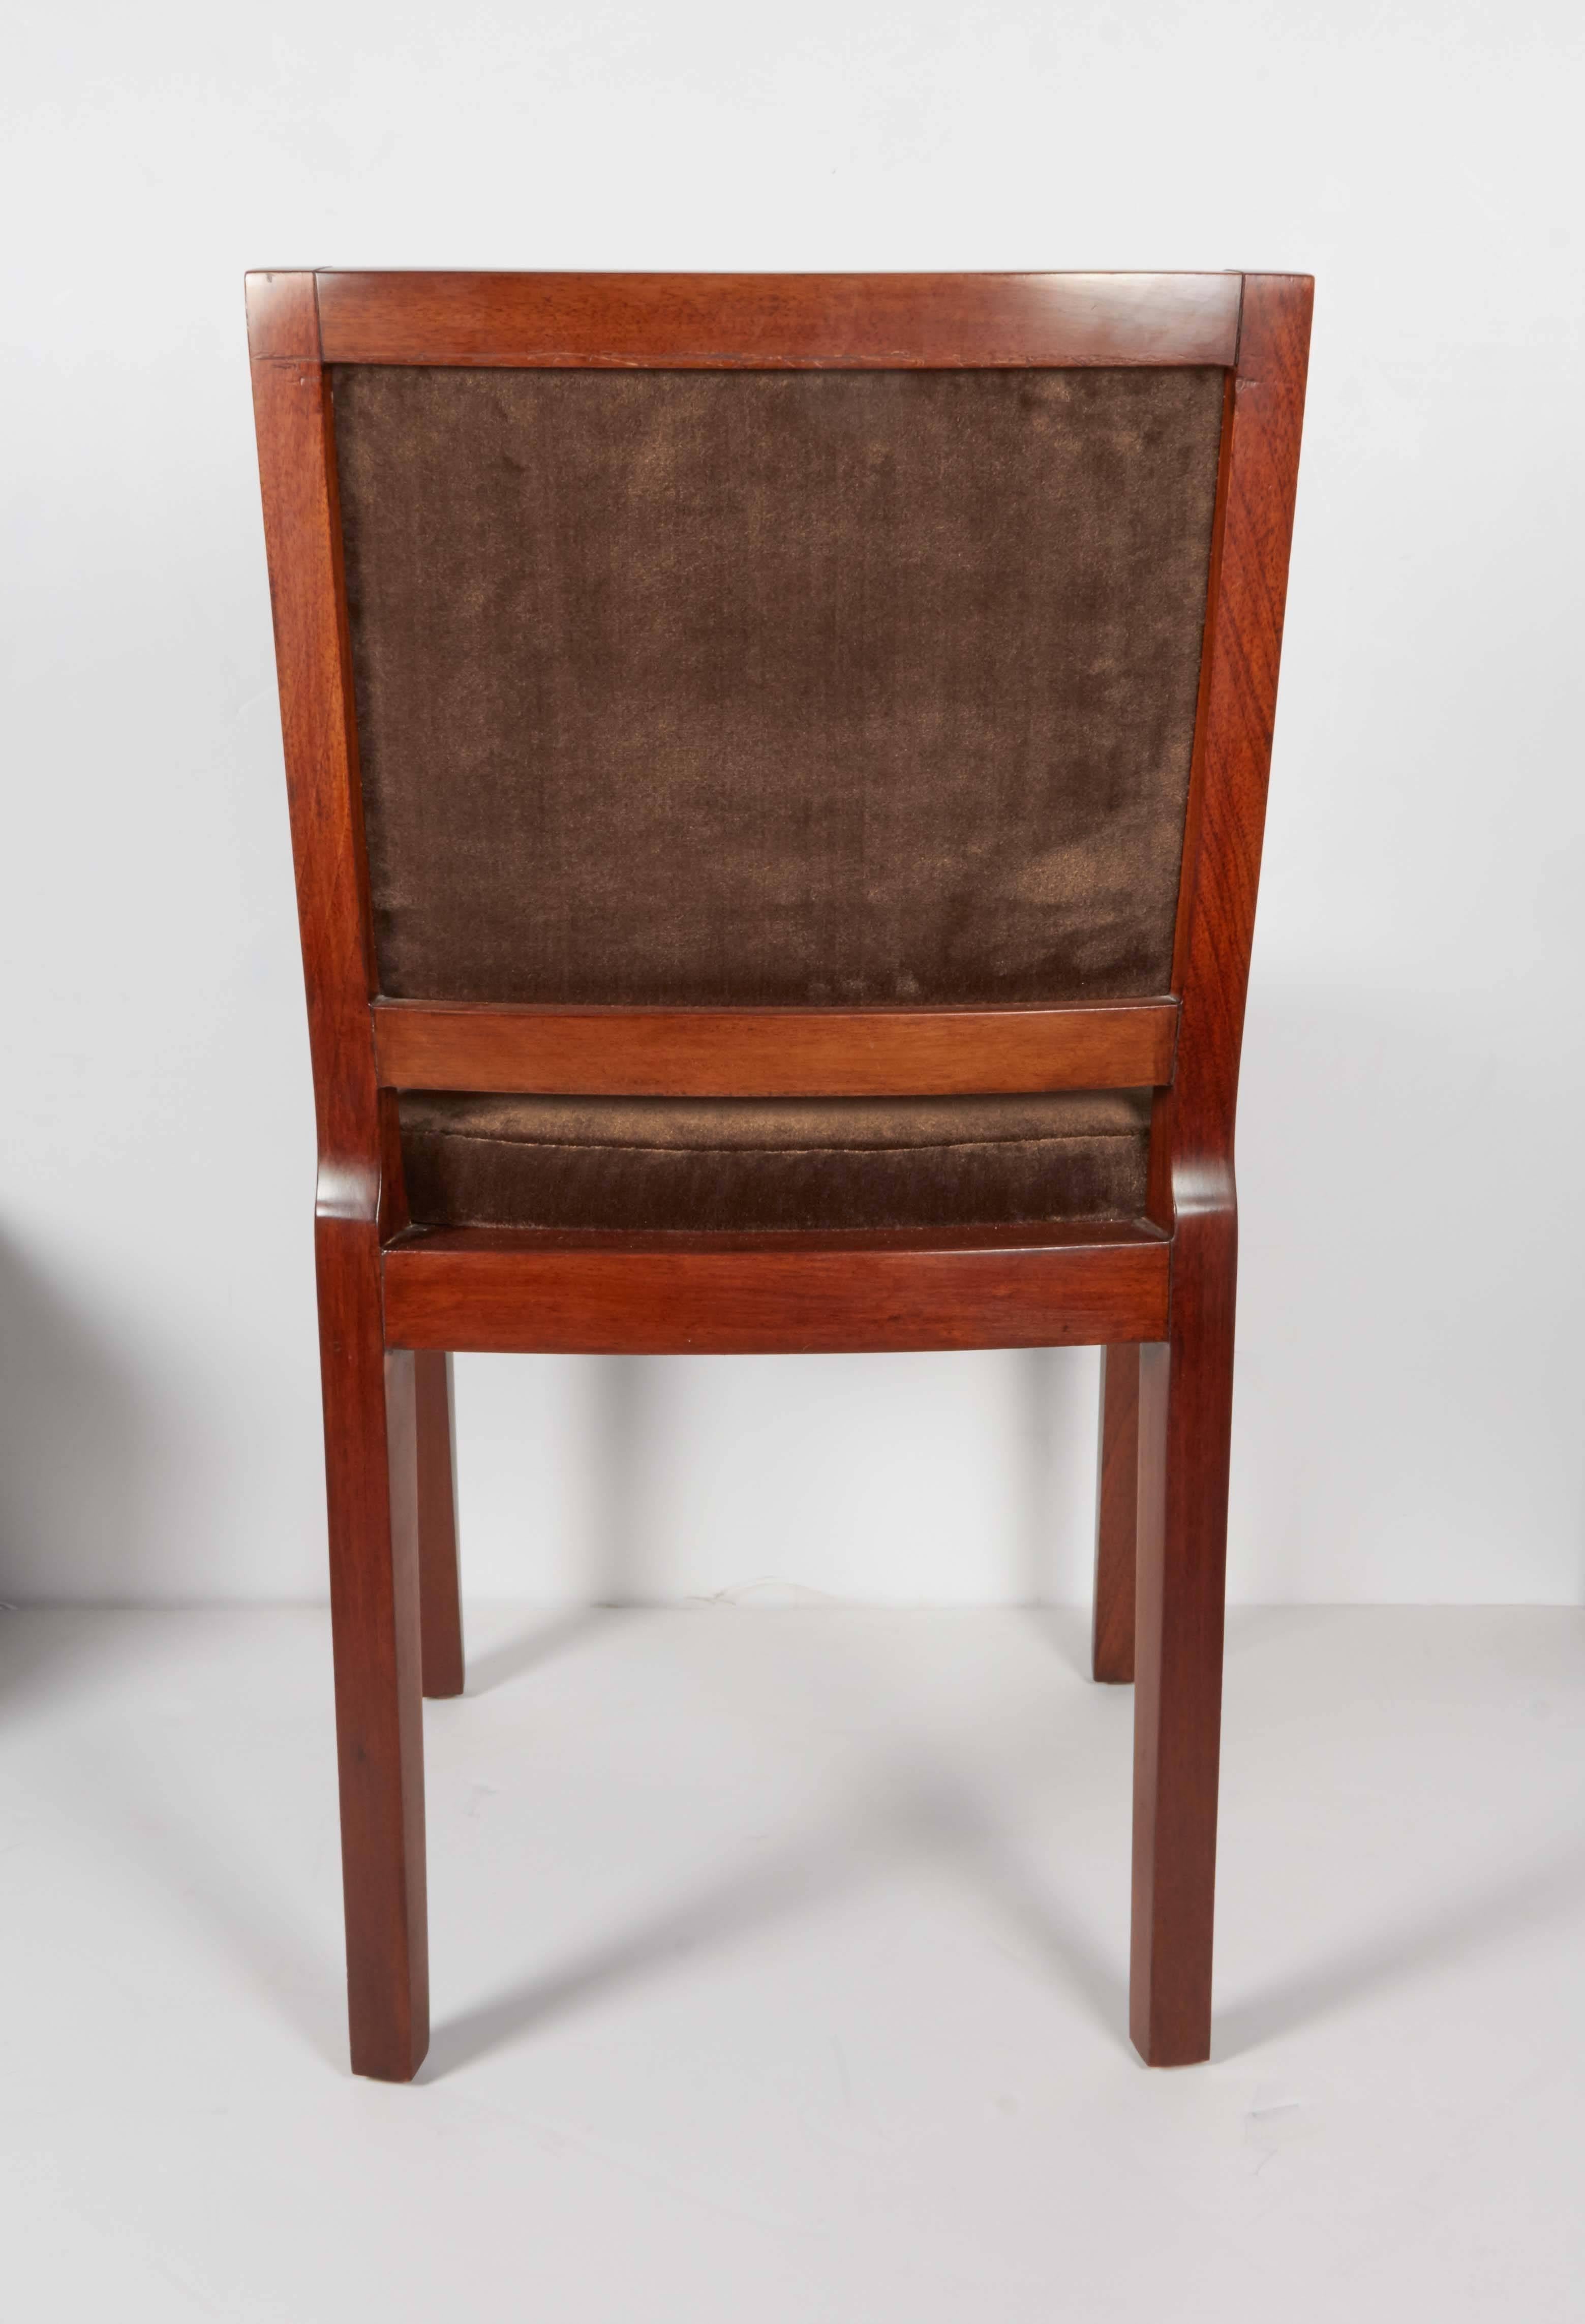 American Modernist Desk Chair in Chocolate Mohair and Walnut Wood